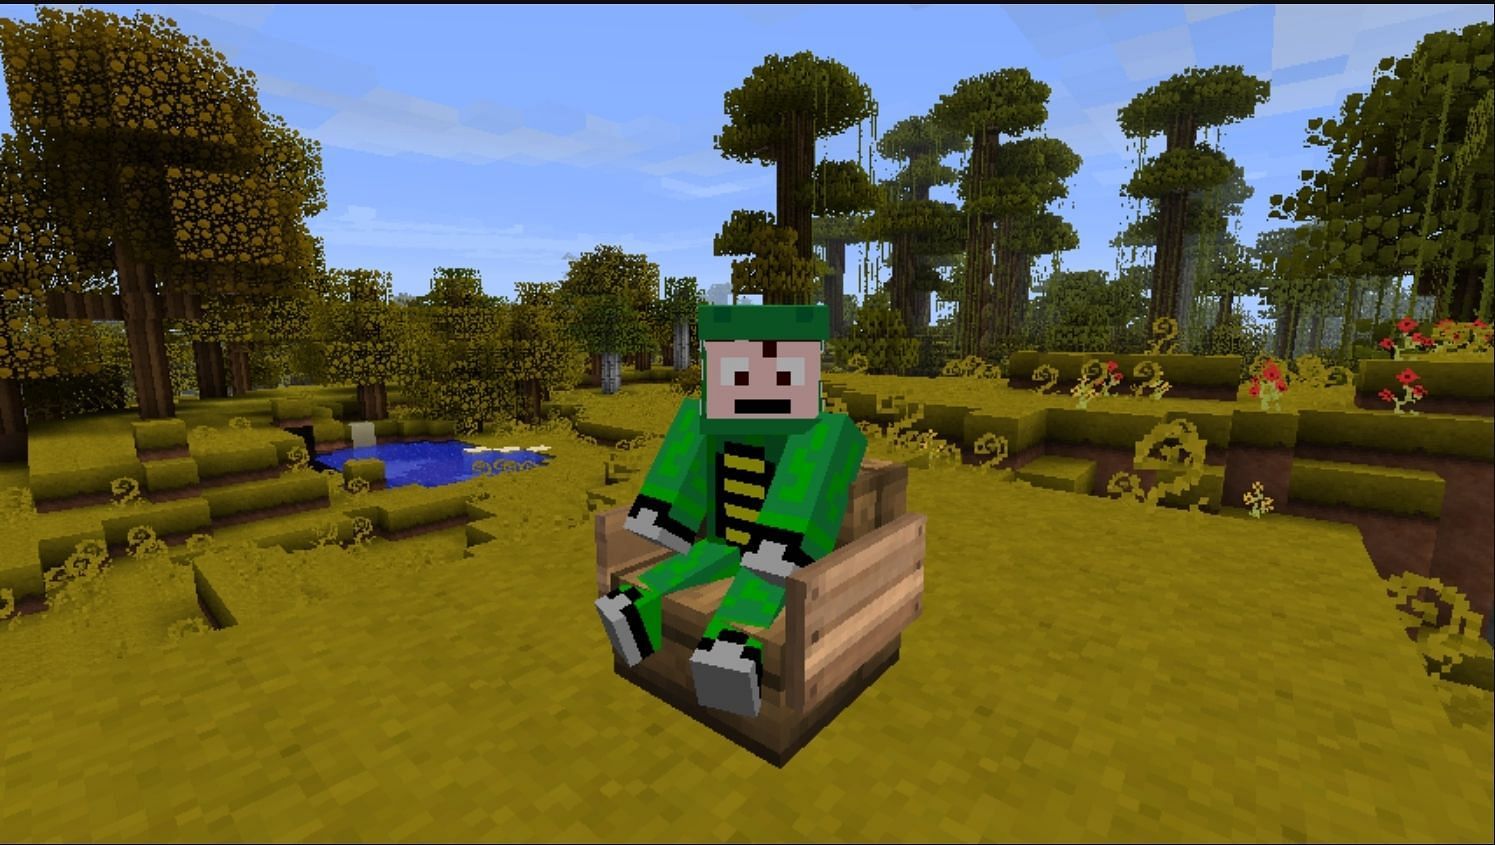 Minecraft plugins allow custom features to be added (Image via Bukkit)